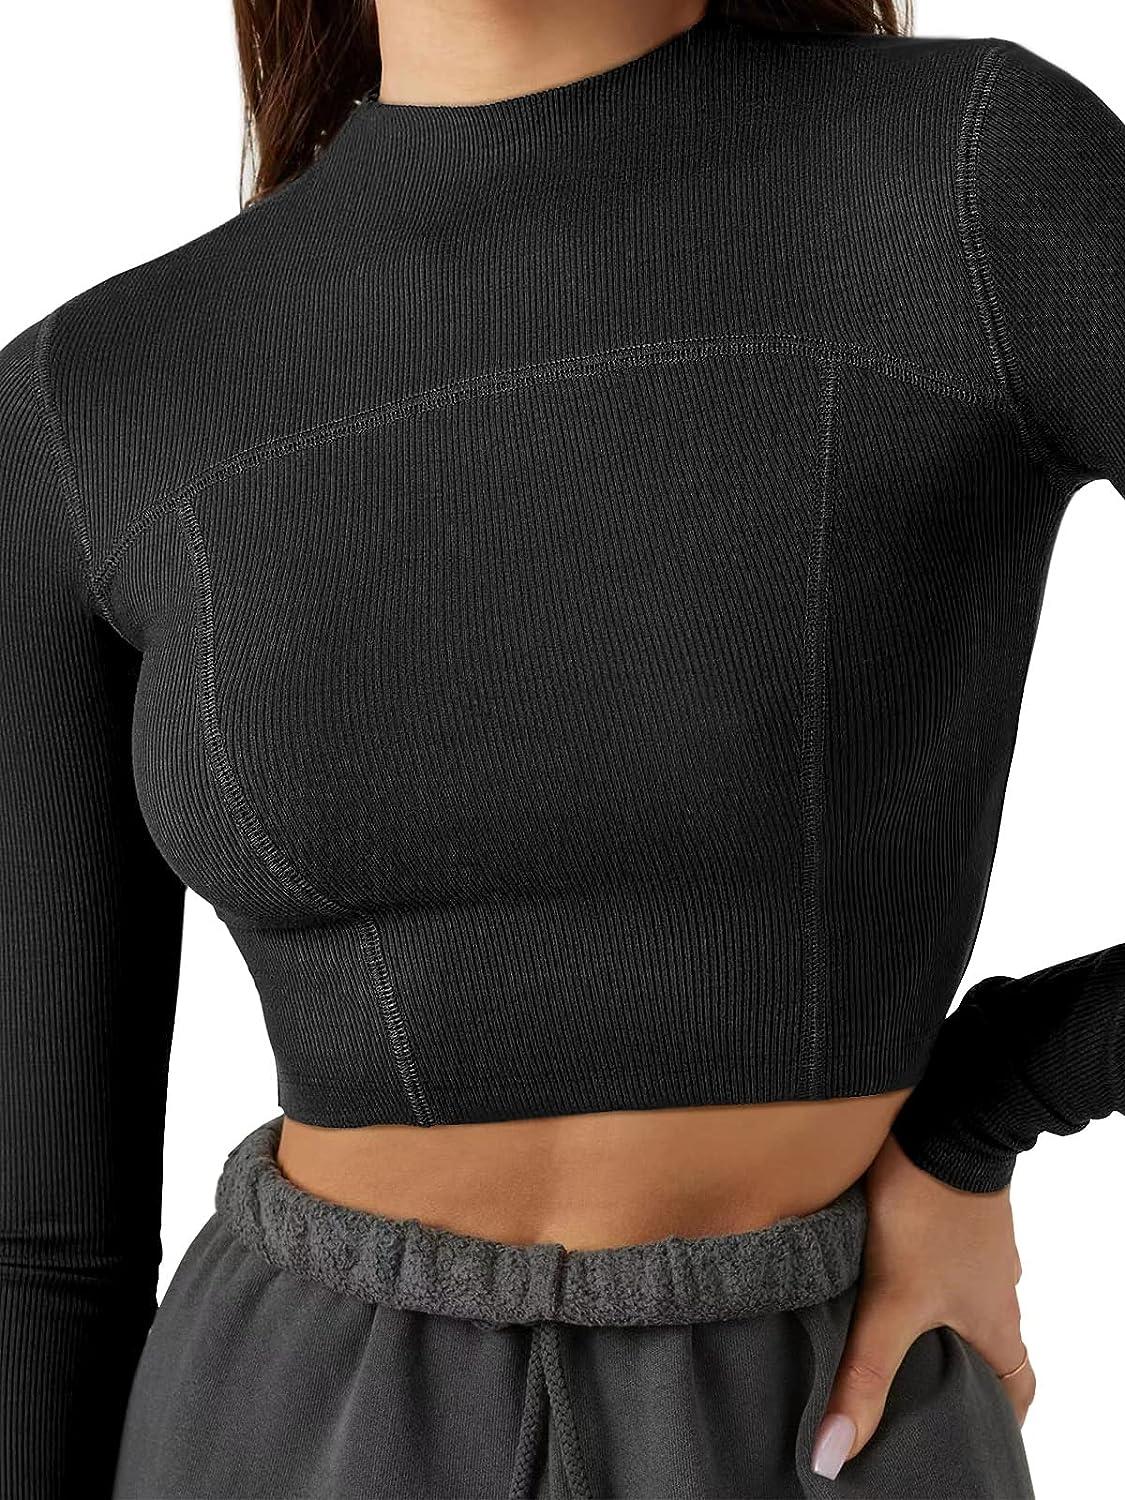 Long Sleeve Workout Shirts for Women Slim Fit Crop Top Yoga Shirts